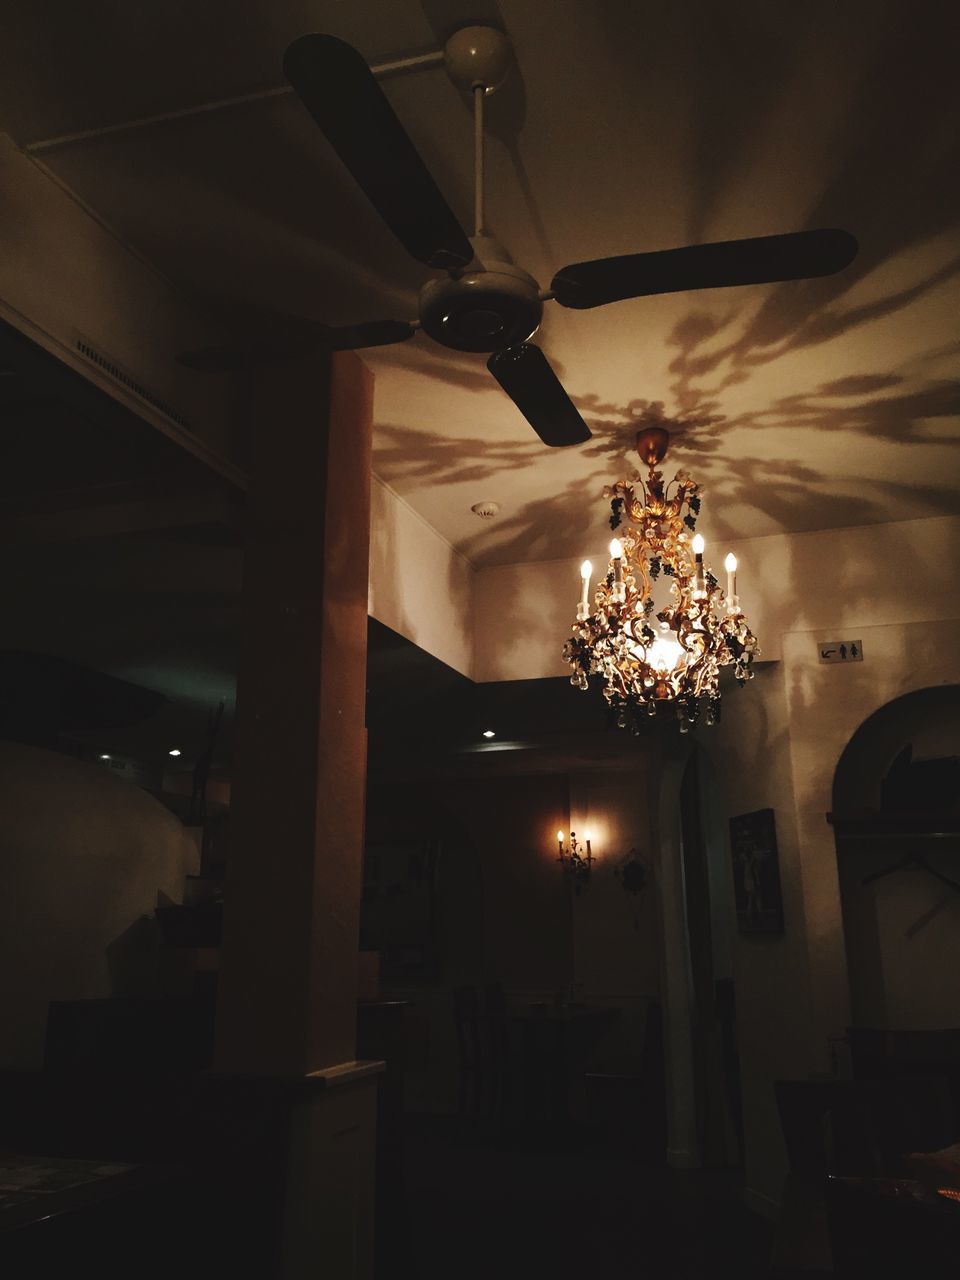 illuminated, lighting equipment, indoors, night, architecture, electric lamp, ceiling, built structure, low angle view, hanging, electric light, electricity, light - natural phenomenon, chandelier, lamp, decoration, lit, no people, home interior, house